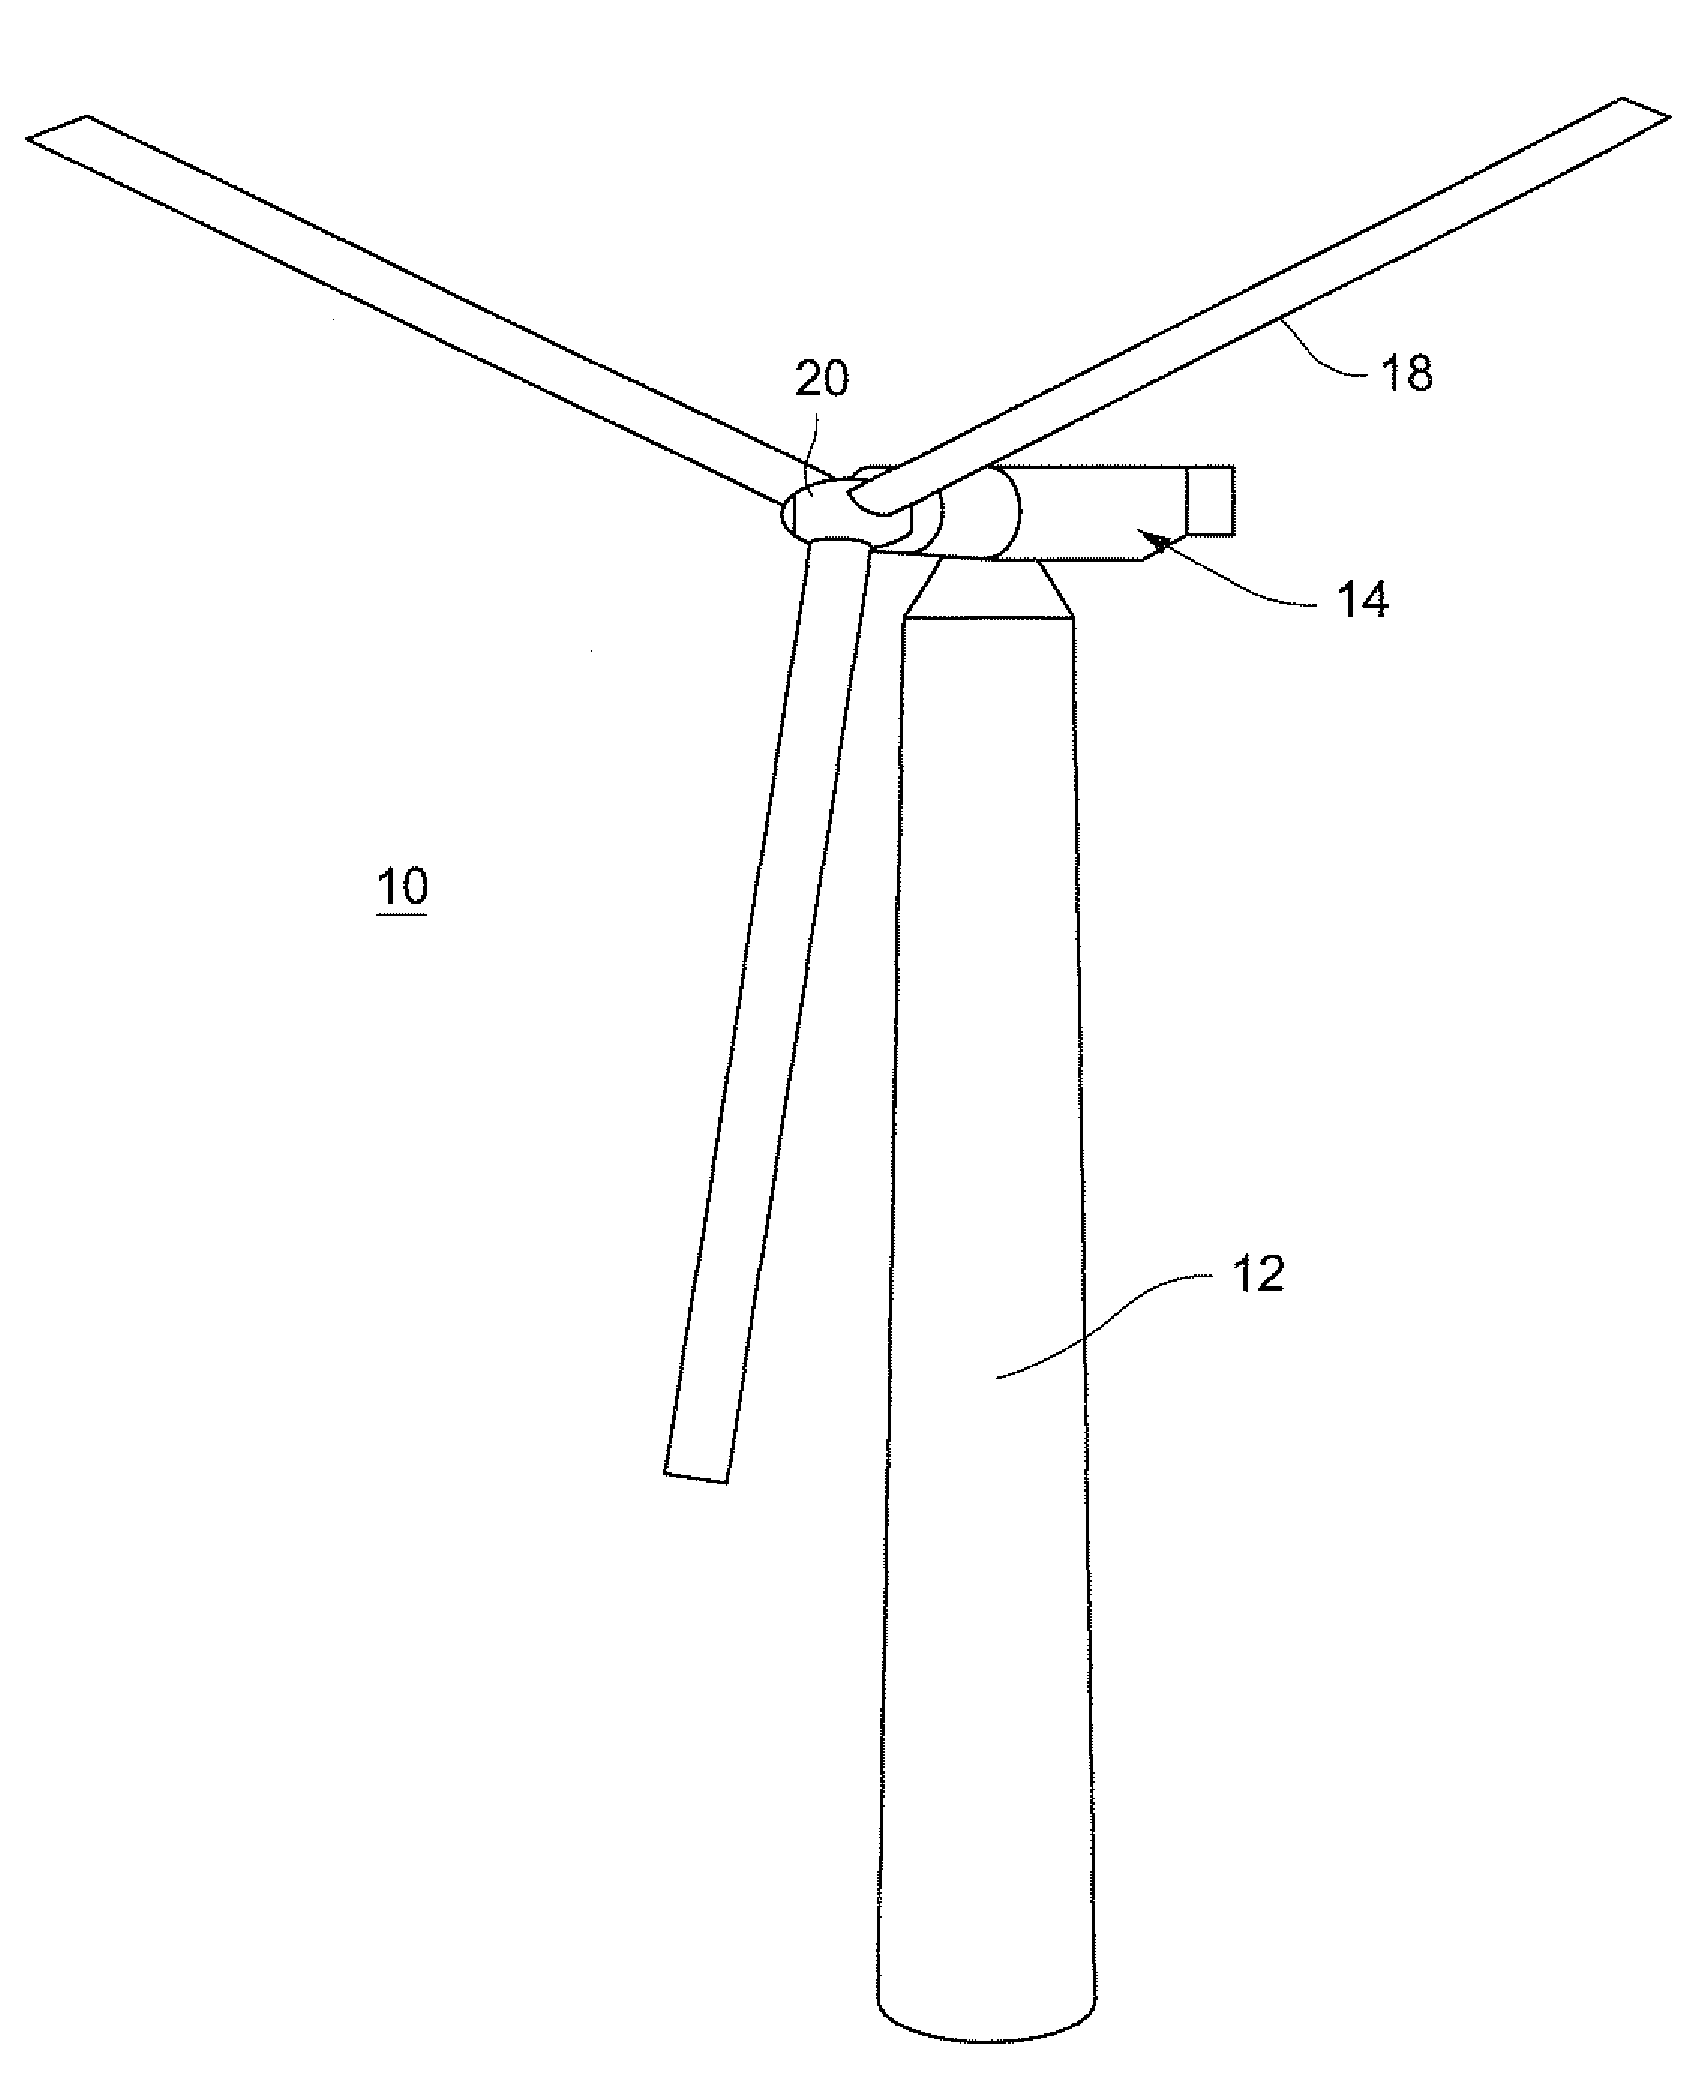 Method and apparatus for a superconducting generator driven by wind turbine